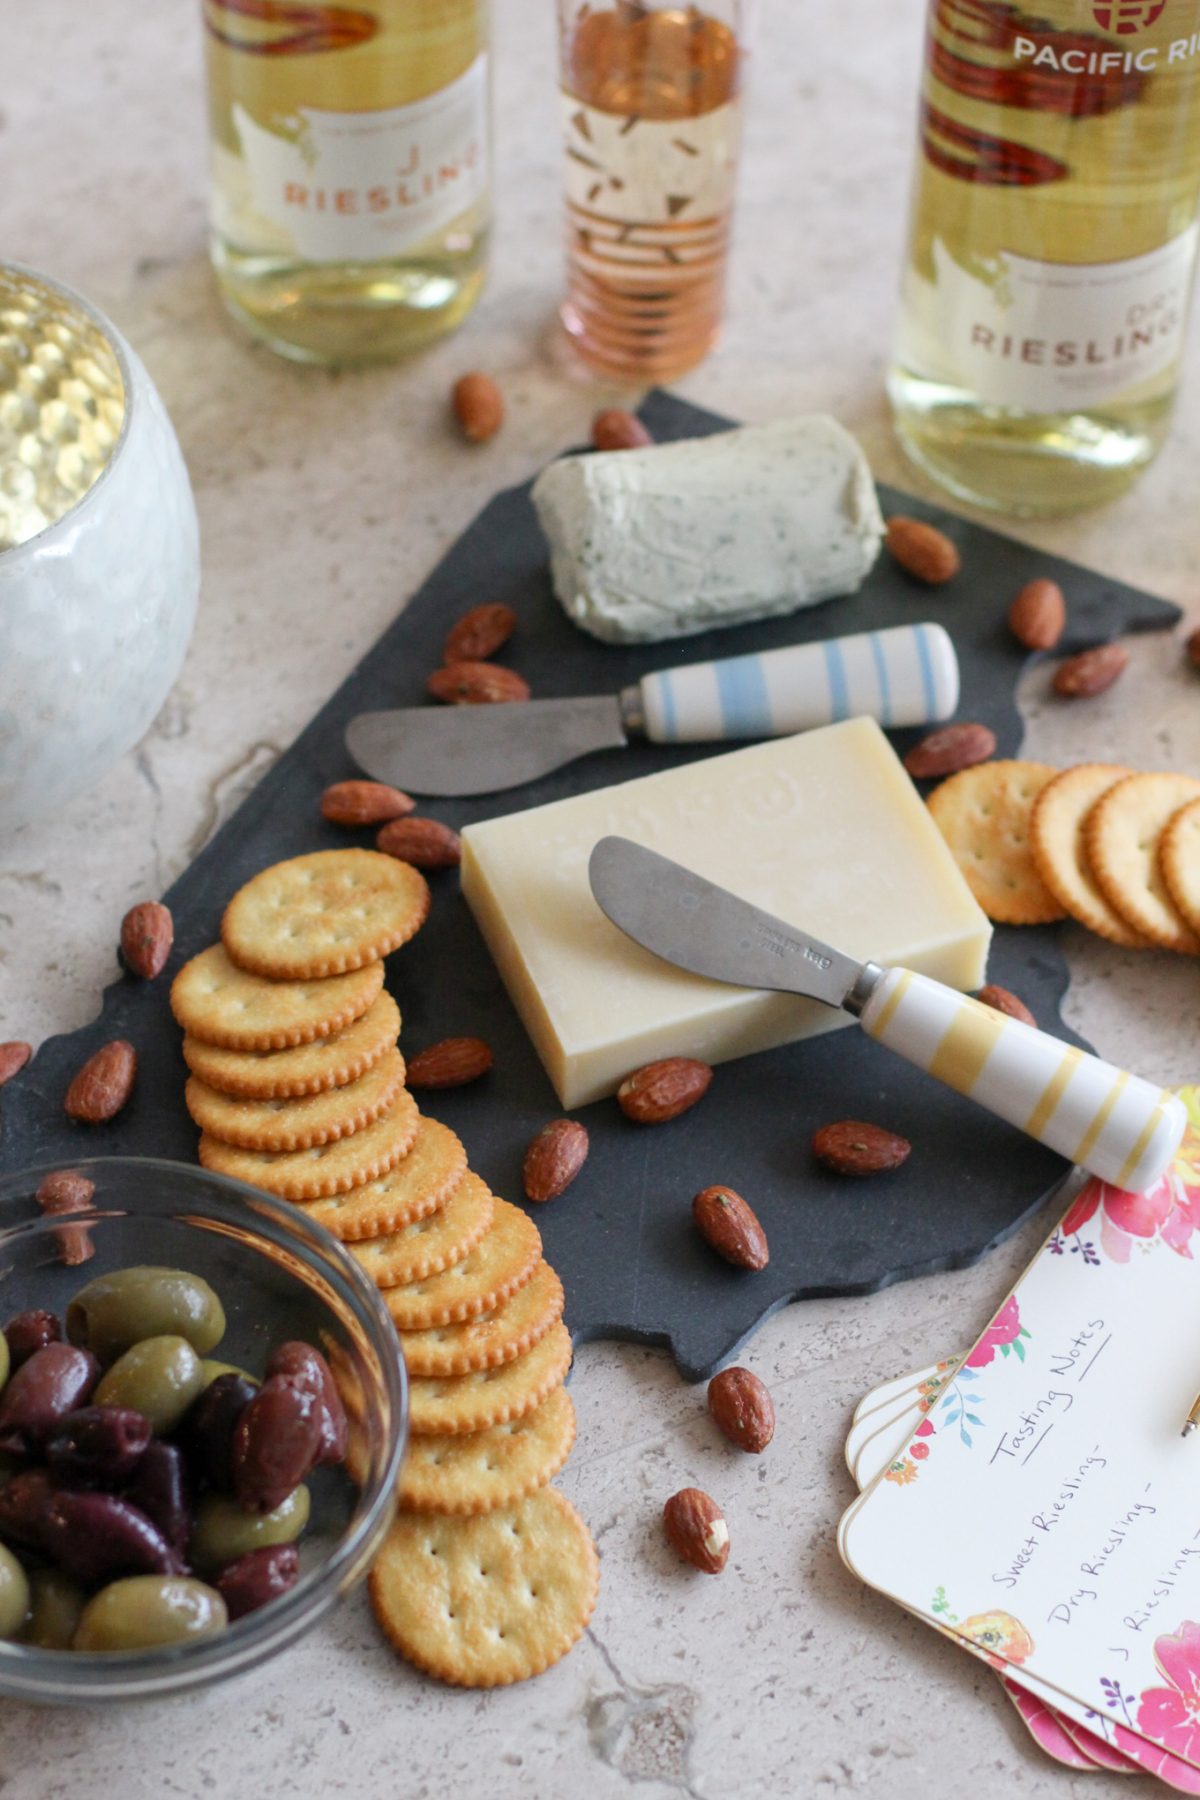 Hosting a Wine and Cheese Night: Riesling Edition